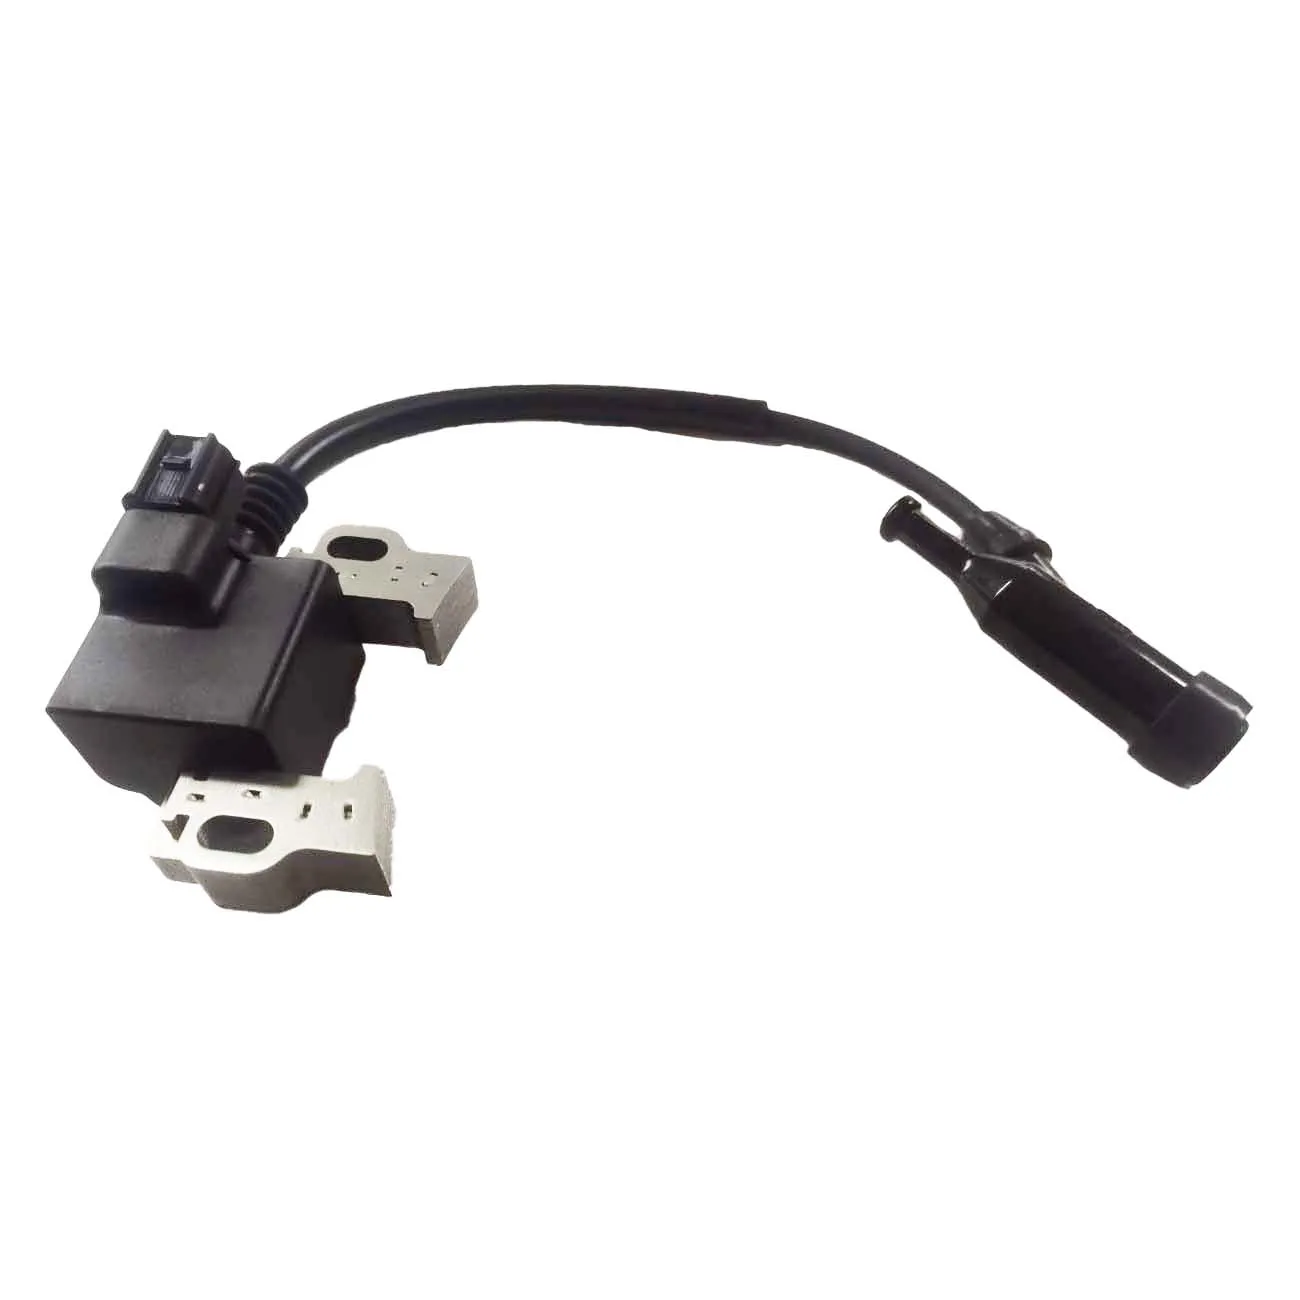 

YP Yuxin Digital Ignition Coil Module with 4 Prong Connector For Honda GX340 GX390 30500-Z5T-003 OEM#30500Z5T003ZF-IG-A00043